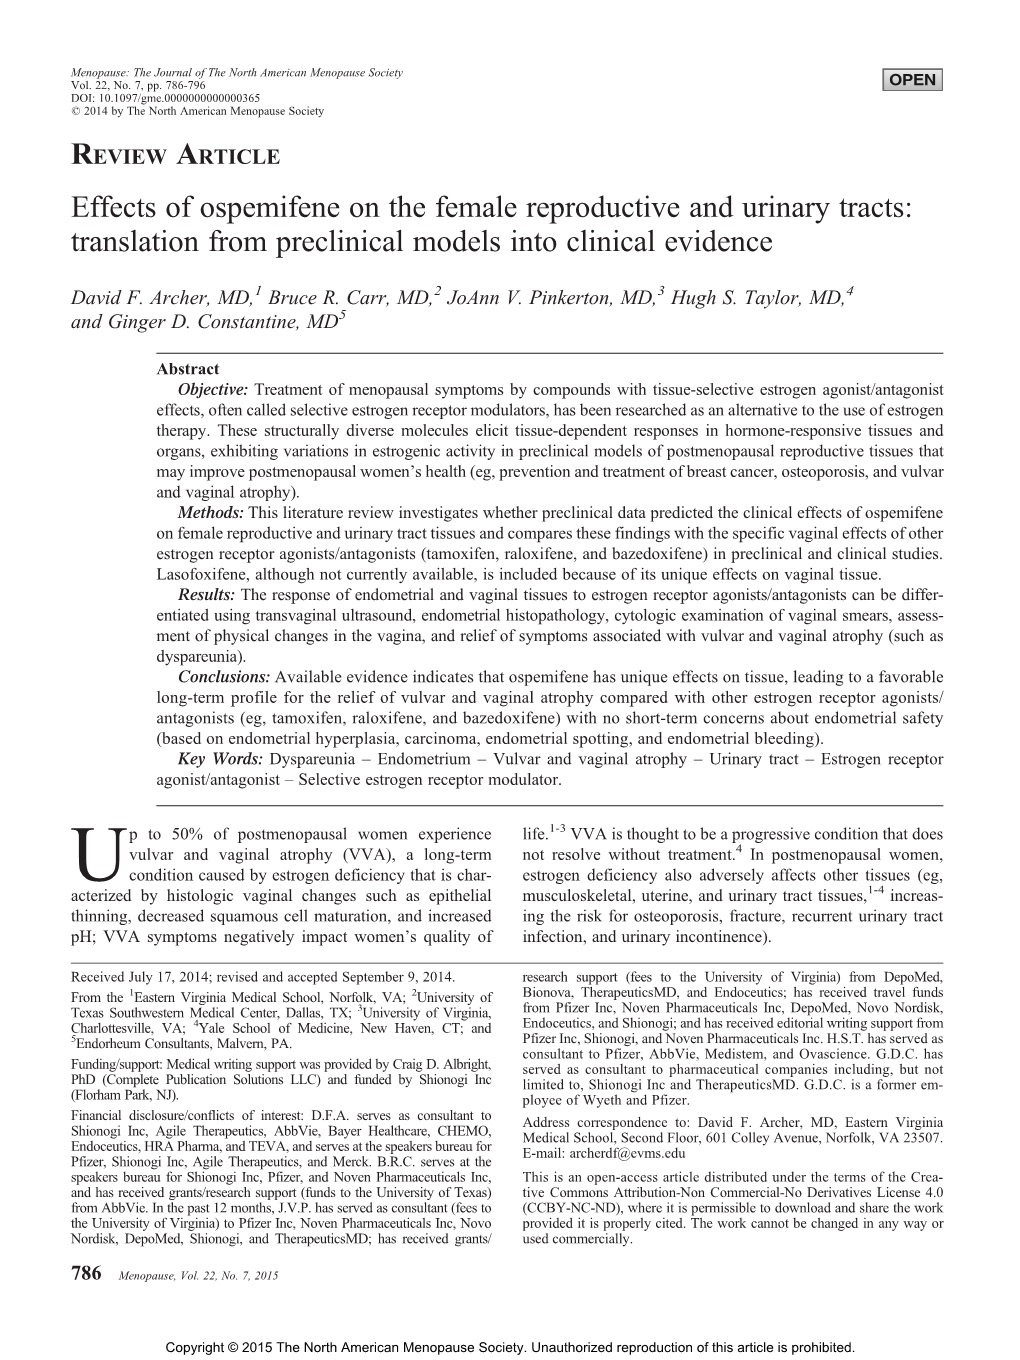 Effects of Ospemifene on the Female Reproductive and Urinary Tracts: Translation from Preclinical Models Into Clinical Evidence